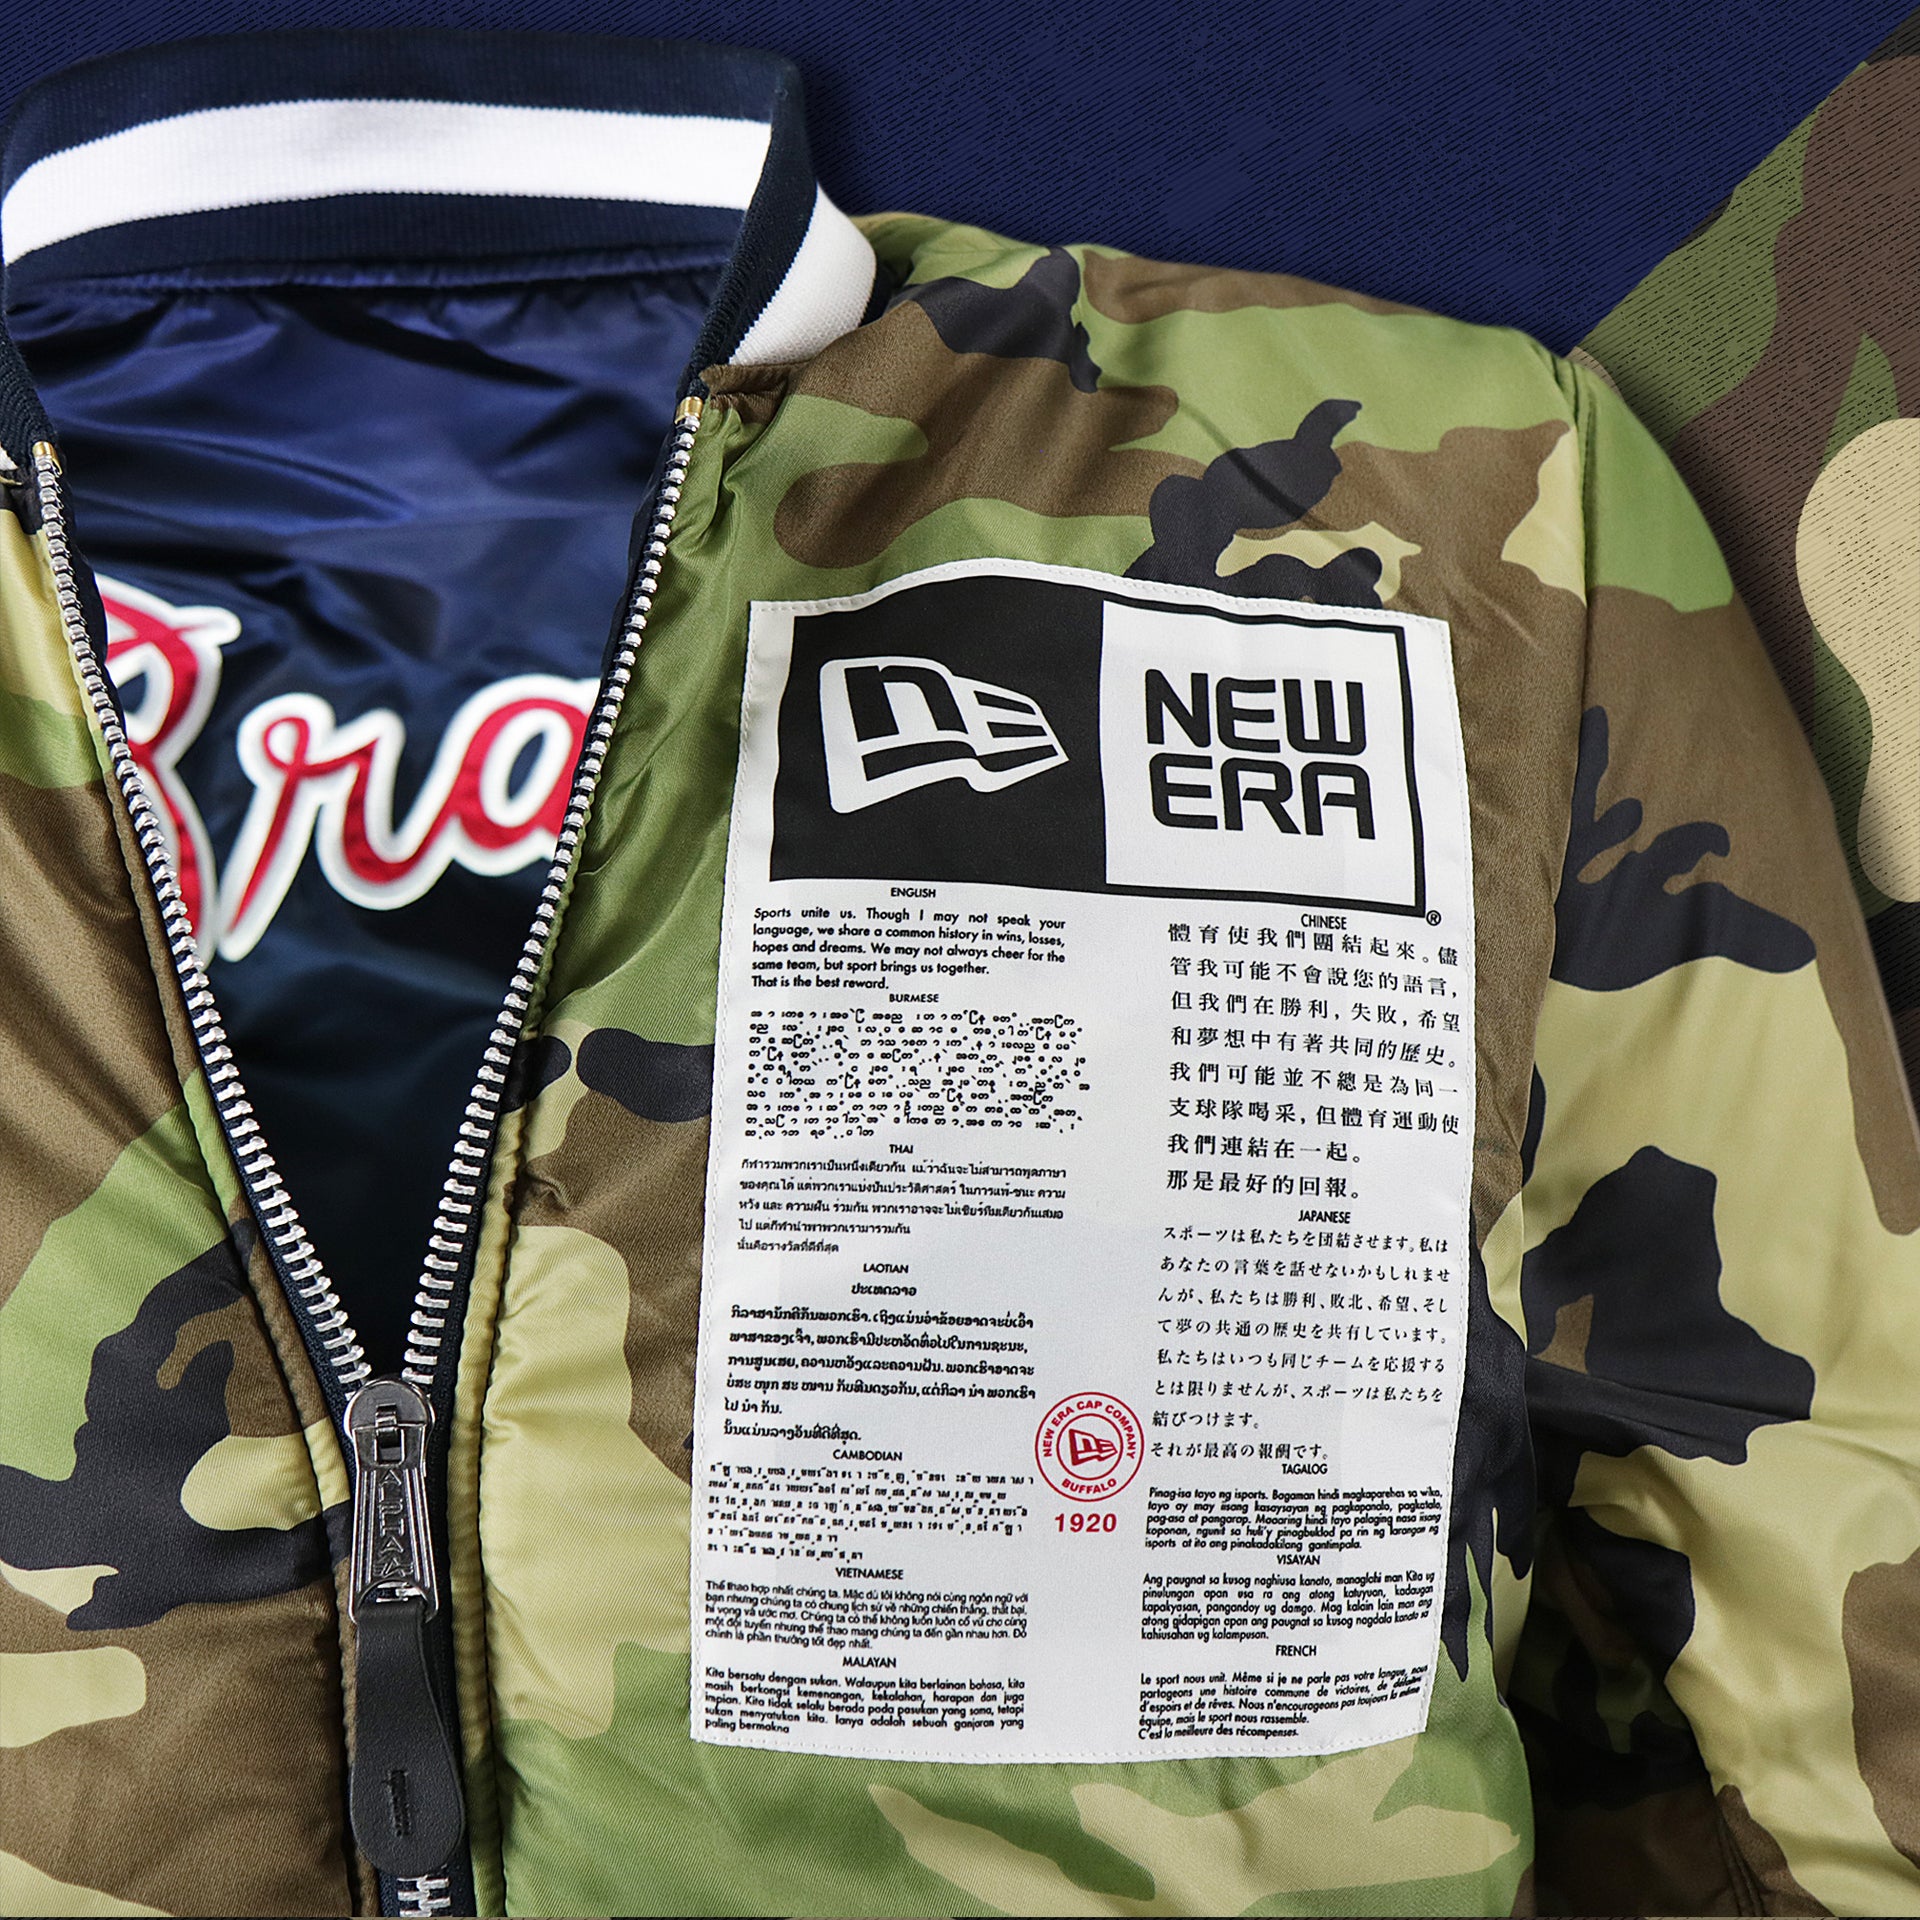 The New Era Sport Unite Us Graphic on the Atlanta Braves MLB Patch Alpha Industries Reversible Bomber Jacket With Camo Liner | Navy Blue Bomber Jacket